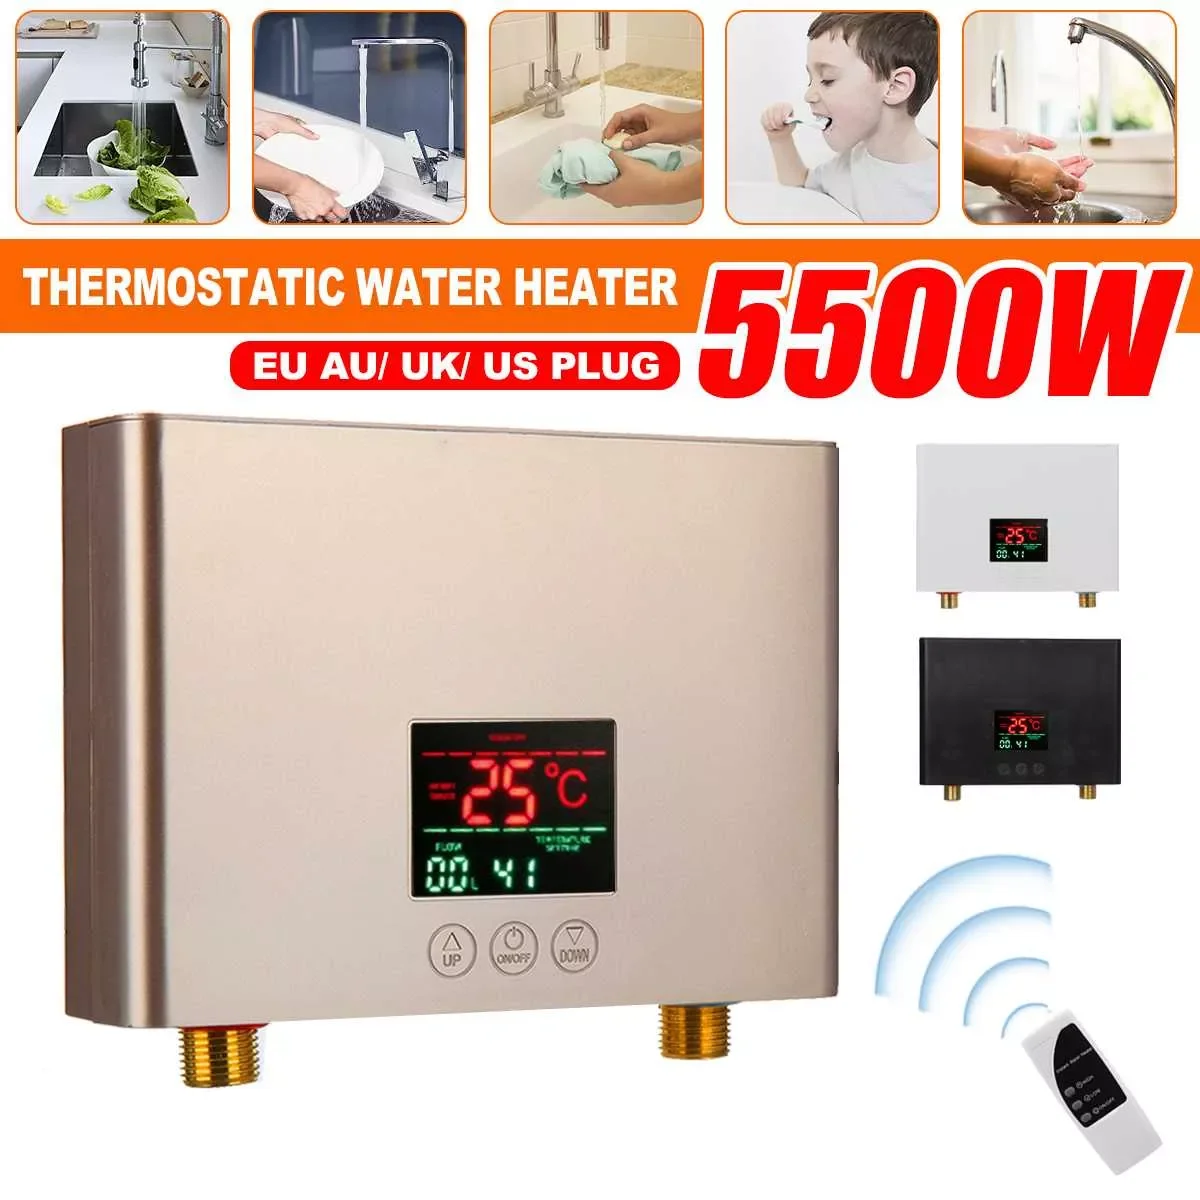 110V 3000W / 220V 5500W Instant Electric Water Heater Mini Intelligent Frequency Conversion Constant Temperature enlarge